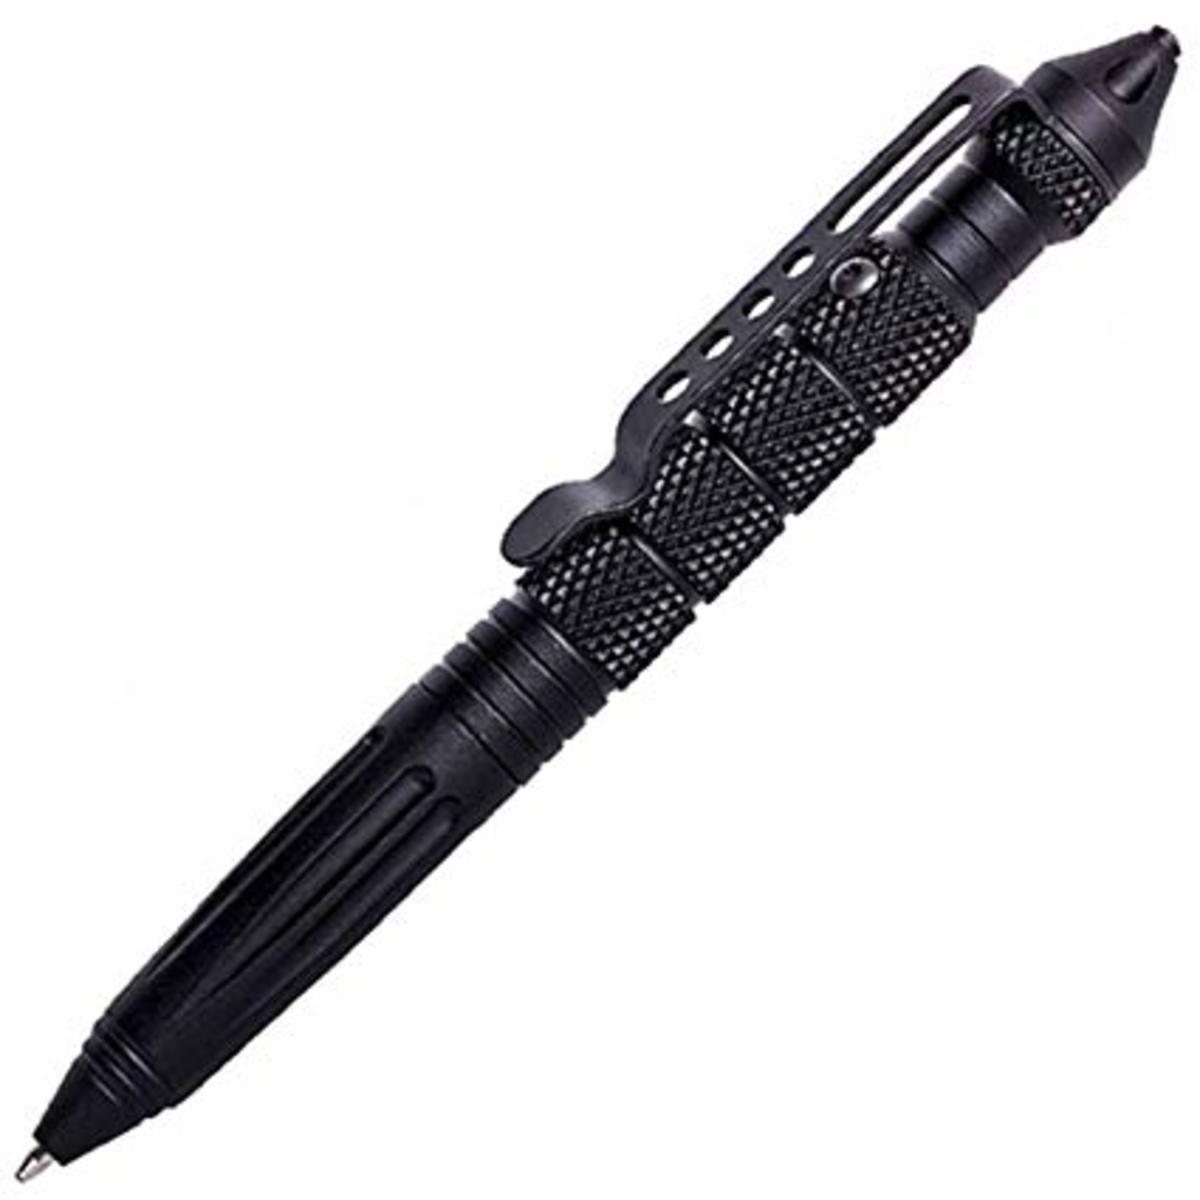 Some items are knock-offs. This is what a real UZI tactical pen looks like.